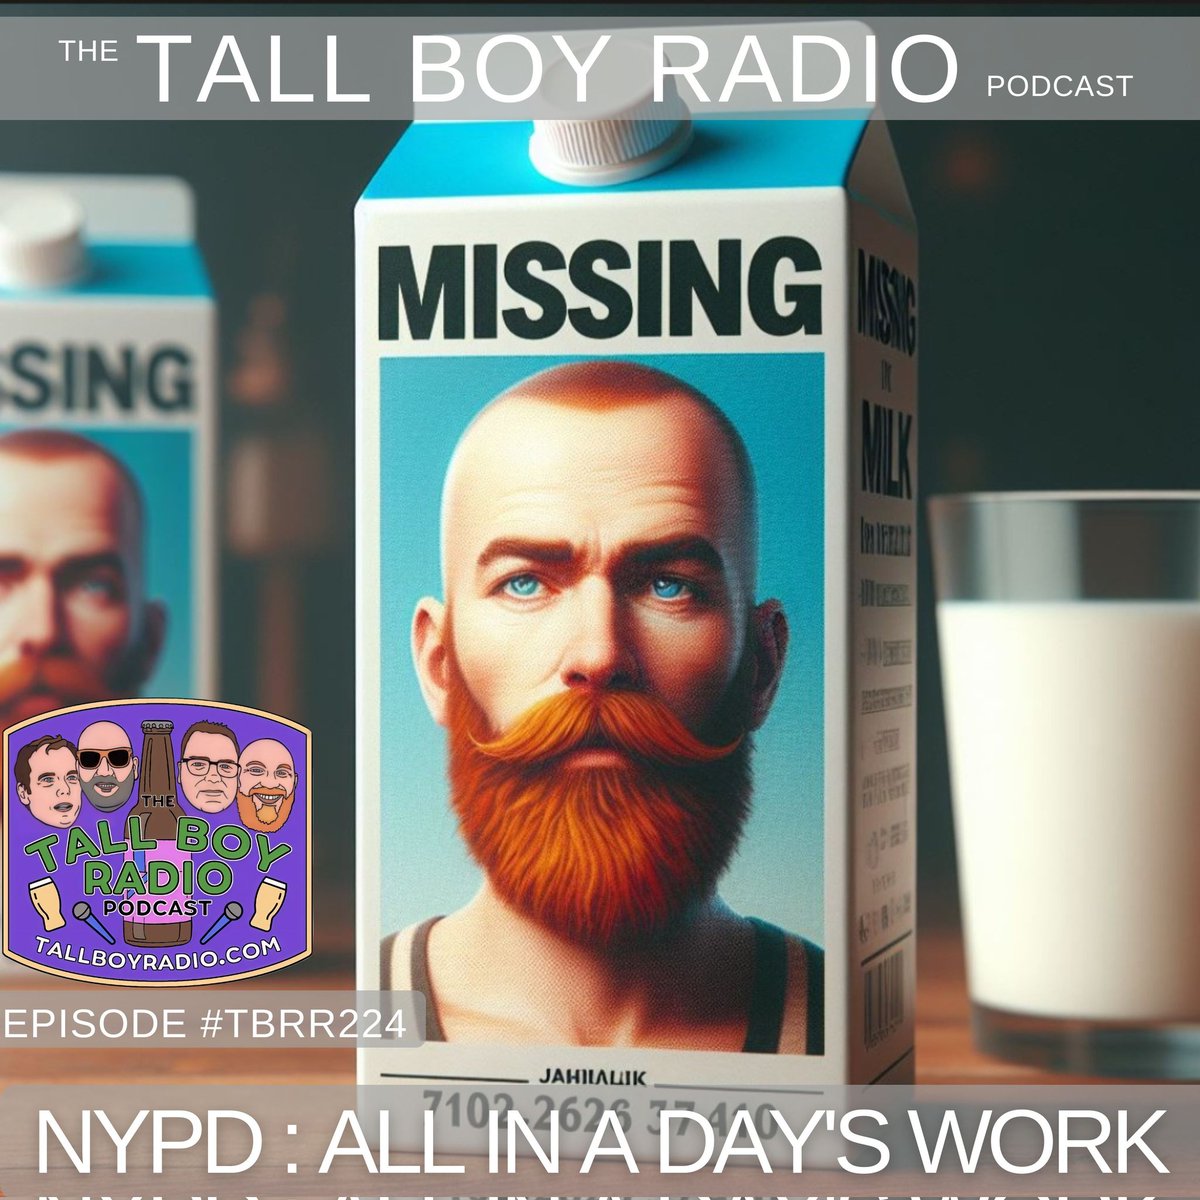 #TBR224 of the #TallBoyRadio #Podcast is #NowStreaming - we were joined by @JohnFerriso to hear about his time in the NYPD SPOTIFY open.spotify.com/episode/0zUQWL… GOOGLE podcasts.google.com/feed/aHR0cHM6L… #TBR #PodNation #PodernFamily tallboyradio.com